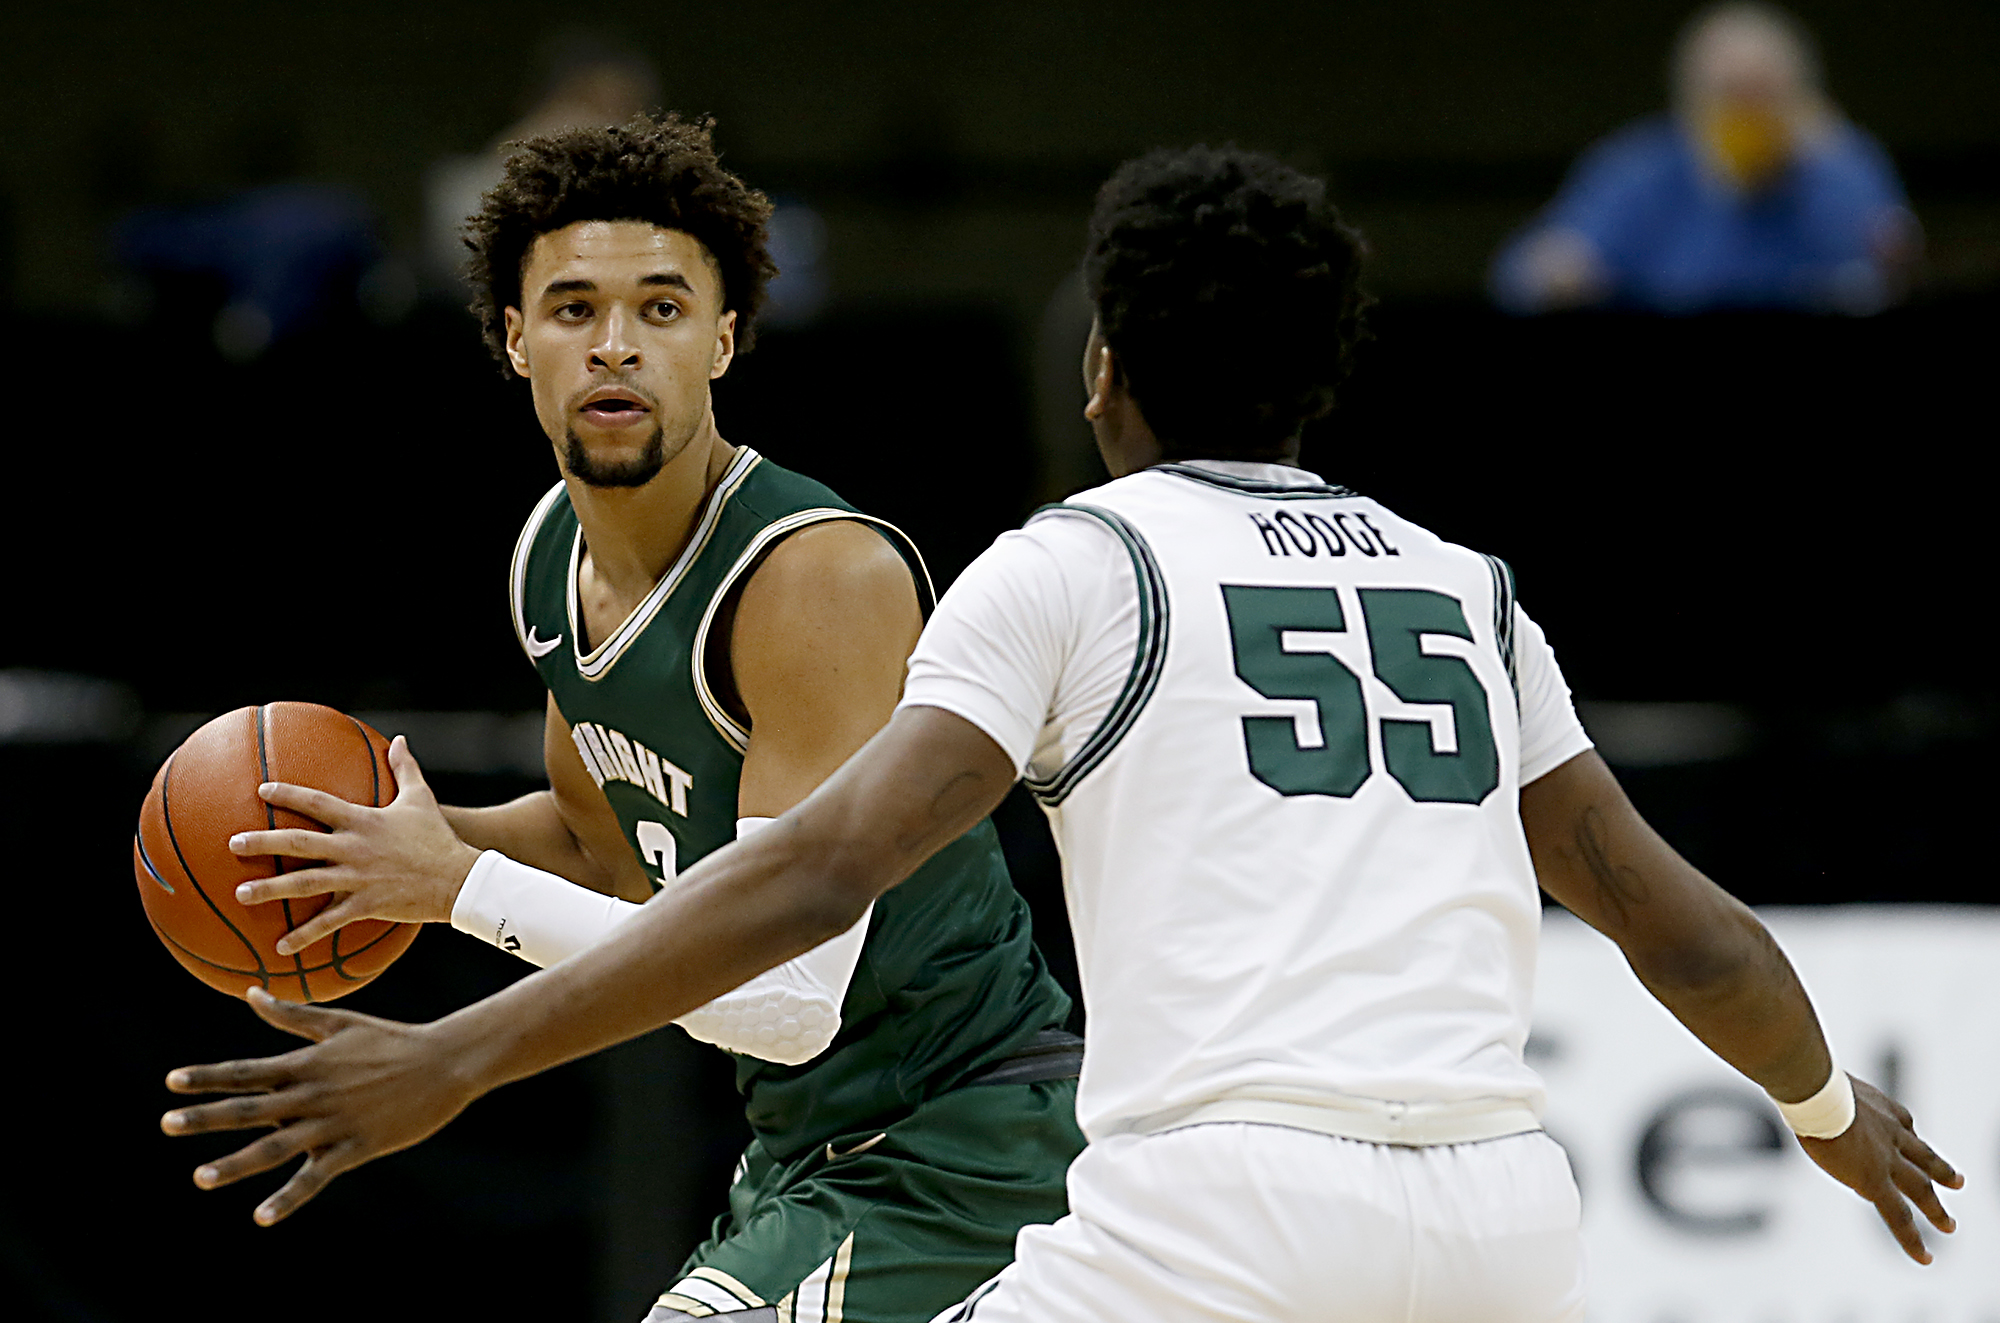 Holden's First Team Honor leads three Wright State Horizon